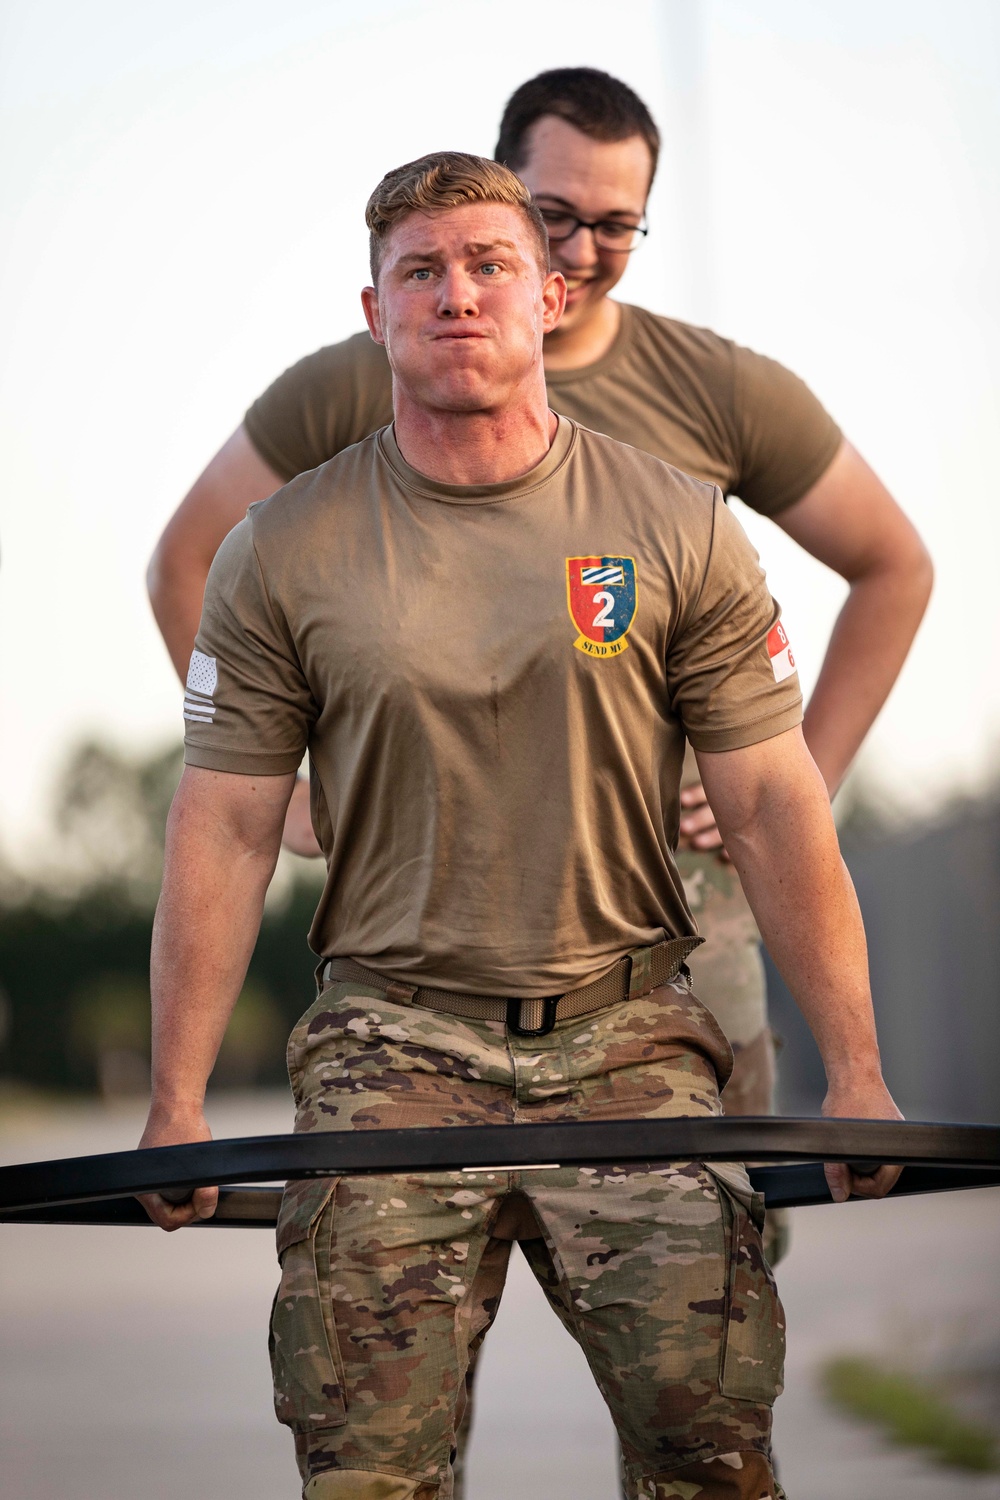 Fort Stewart’s 2nd armored brigade hosts first Iron Spartan Competition